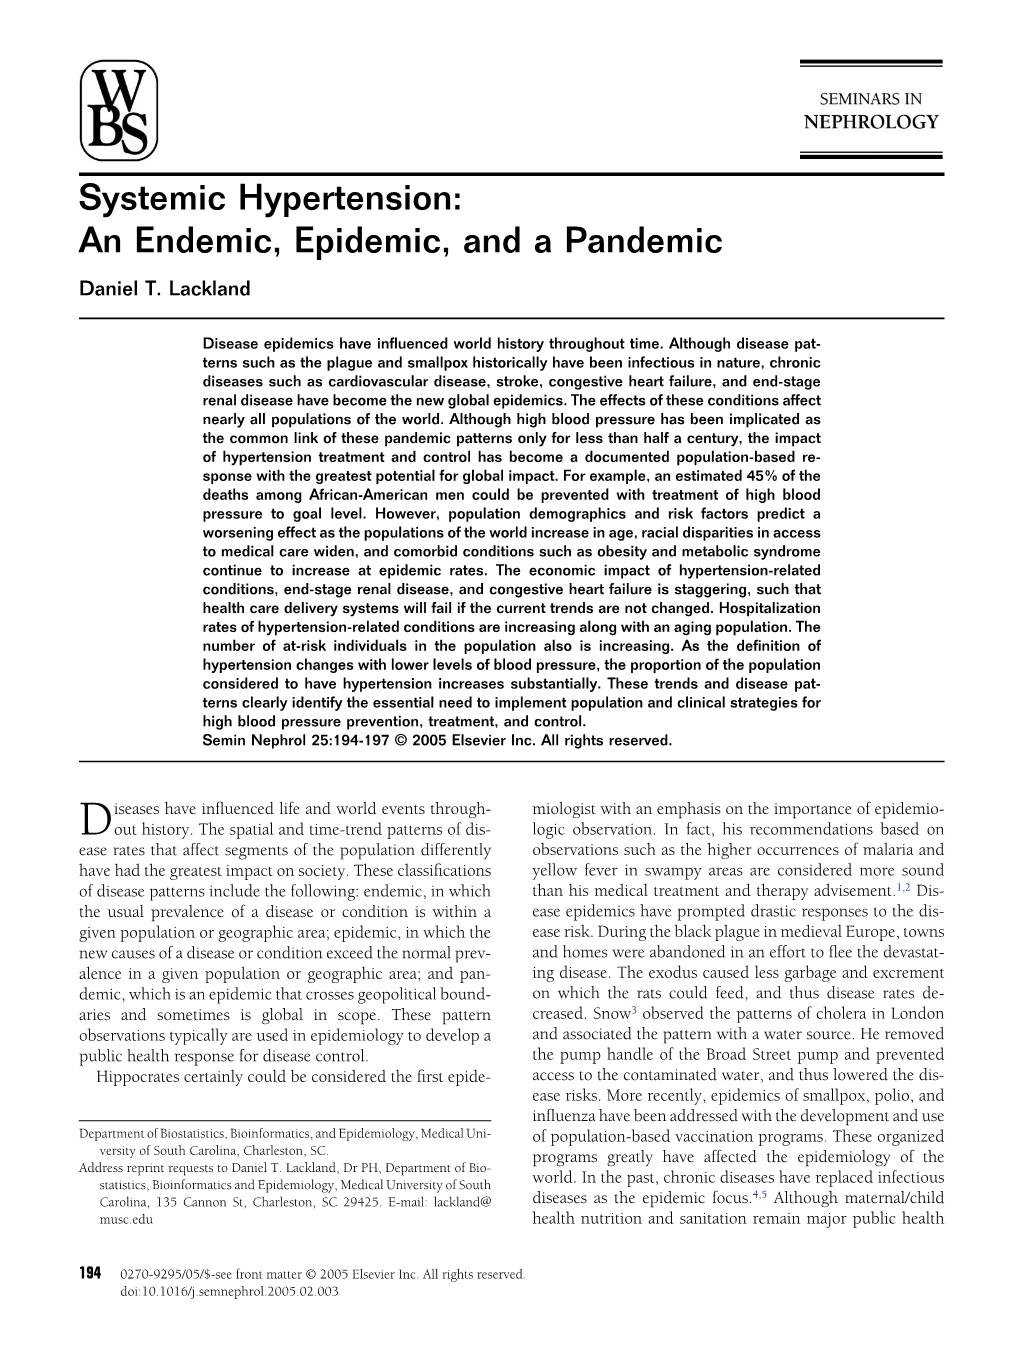 Systemic Hypertension: an Endemic, Epidemic, and a Pandemic Daniel T